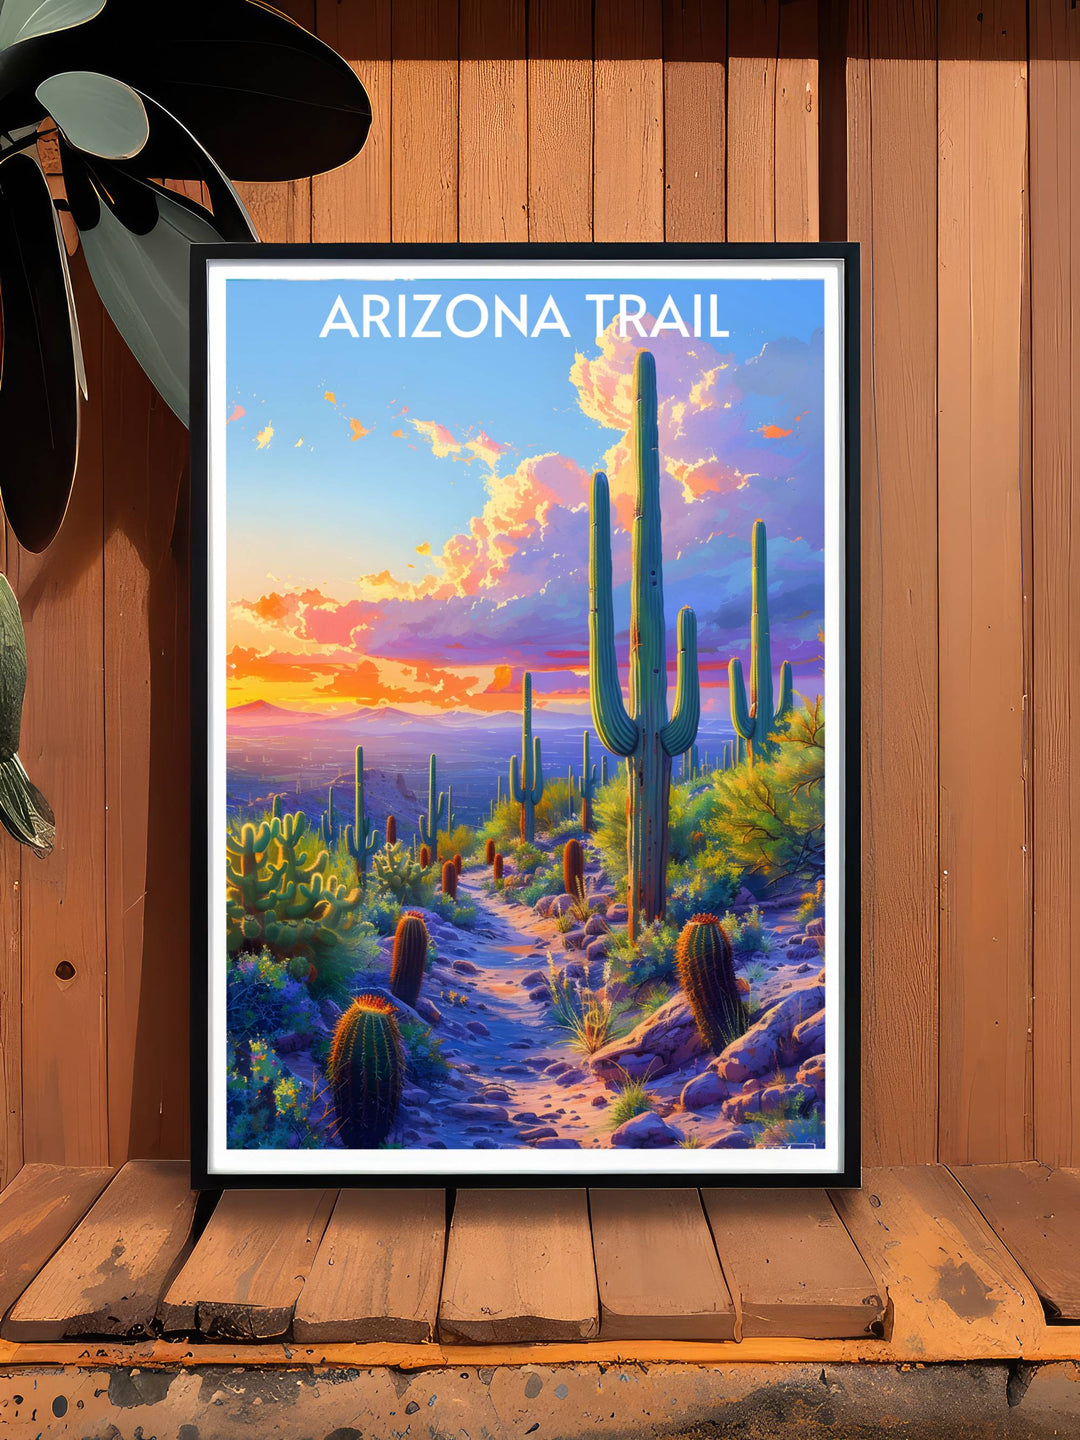 Arizona Trail Map and Saguaro National Park print designed for hiking enthusiasts celebrating the spirit of exploration and the breathtaking landscapes of Americas national parks perfect for home or office decor.